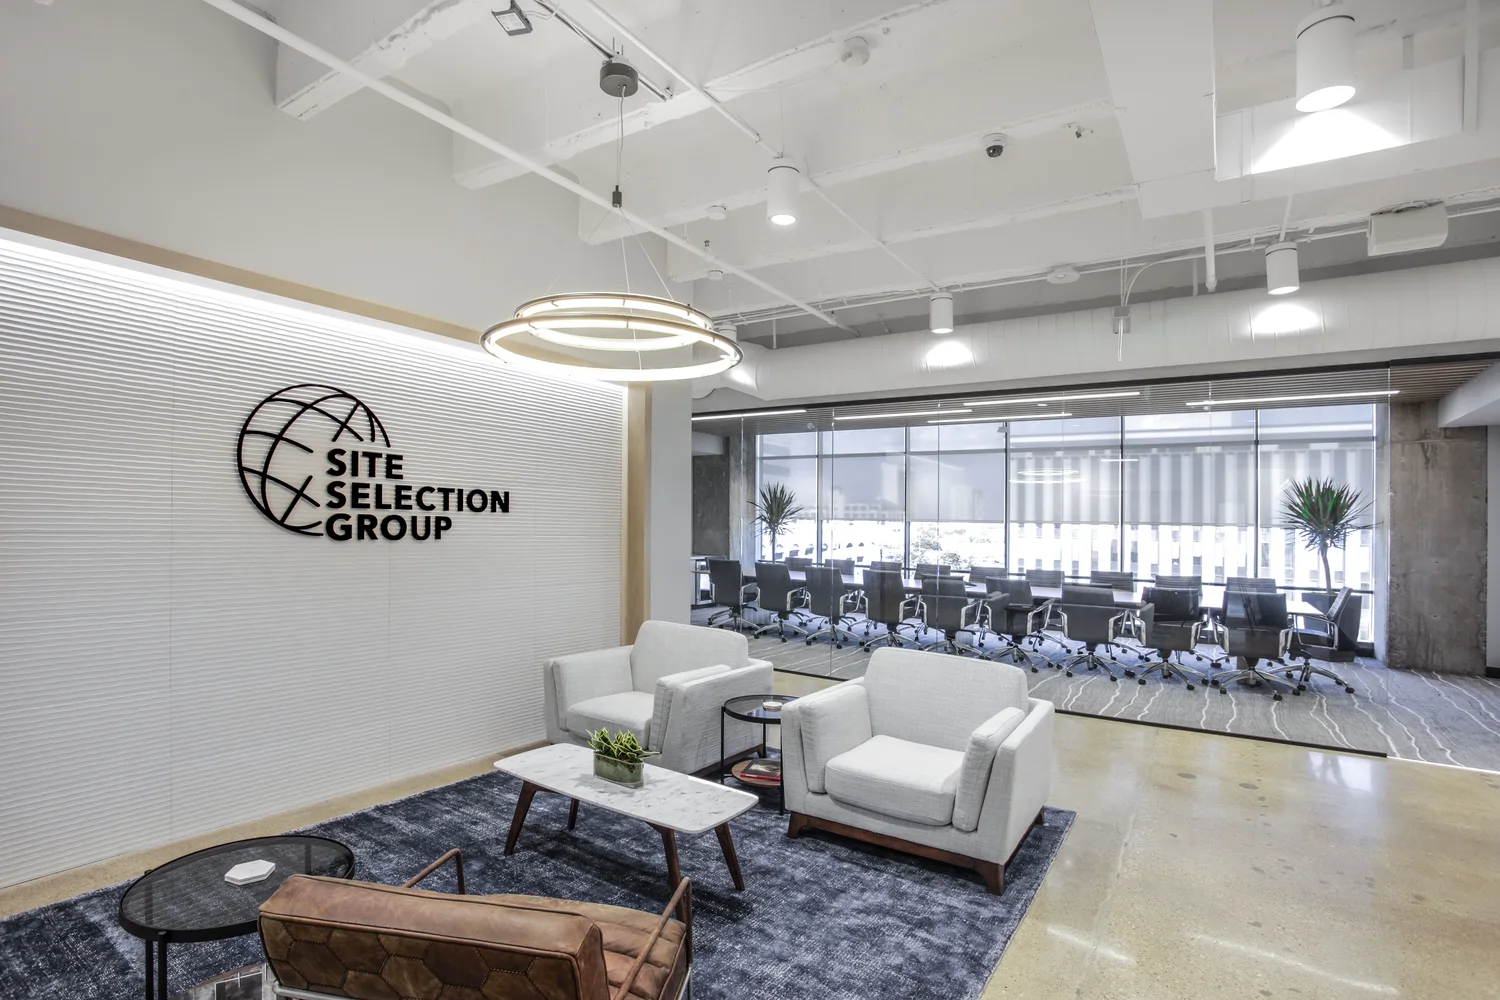 Site Selection Group office in Dallas, Texas, United States